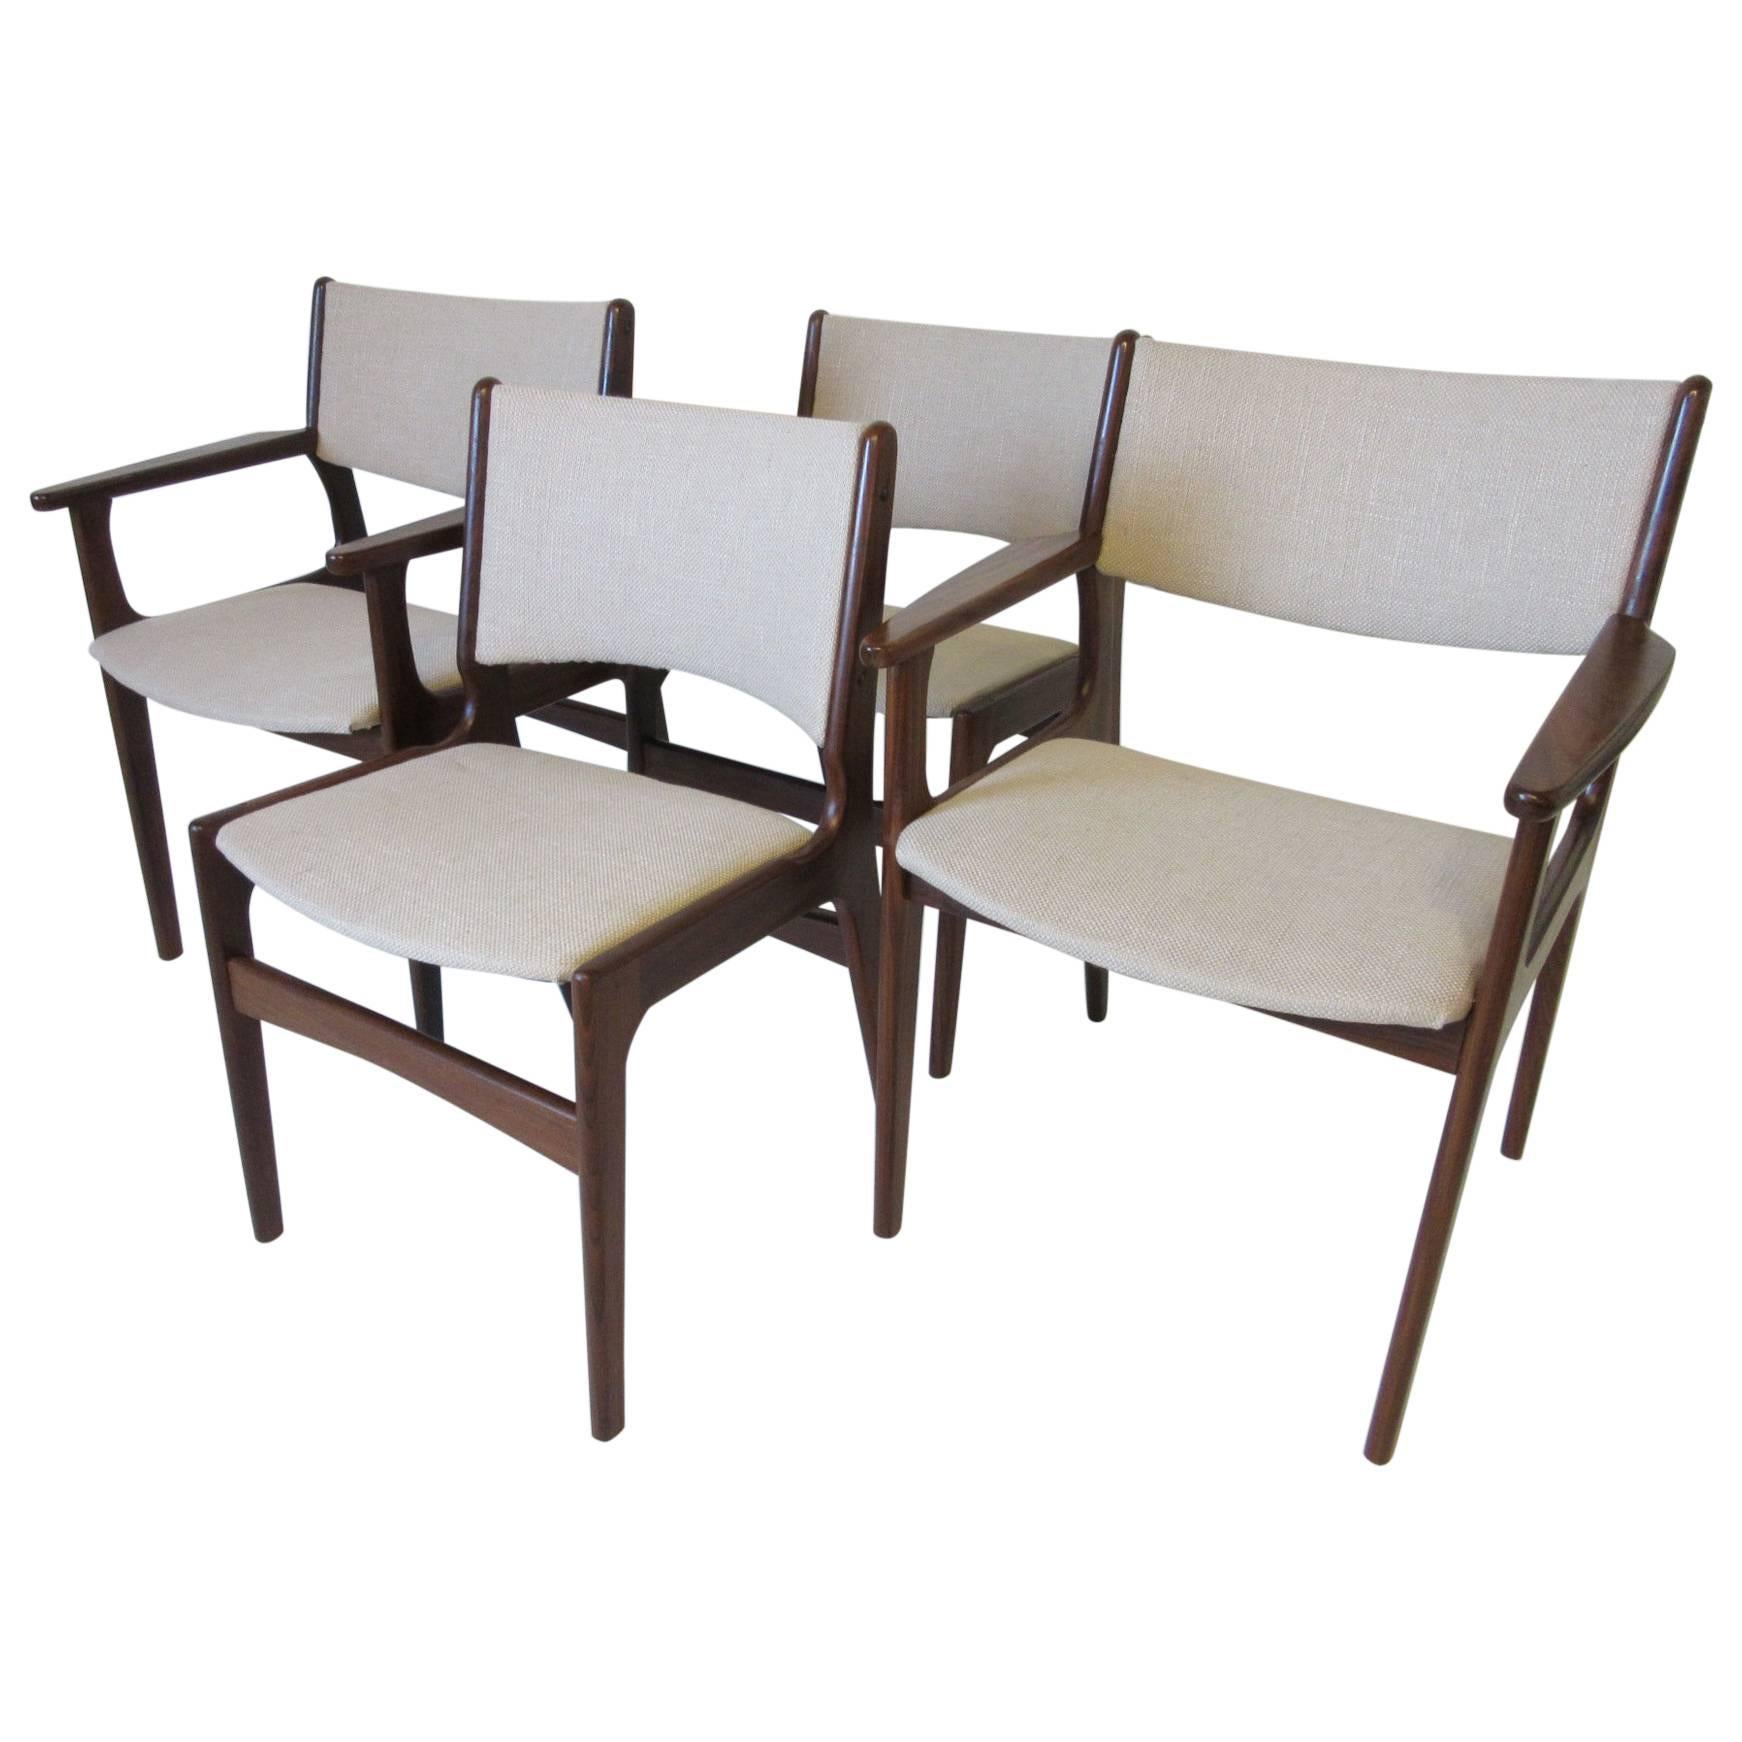 Danish Upholstered Wood Dining Chairs by Erik Buch